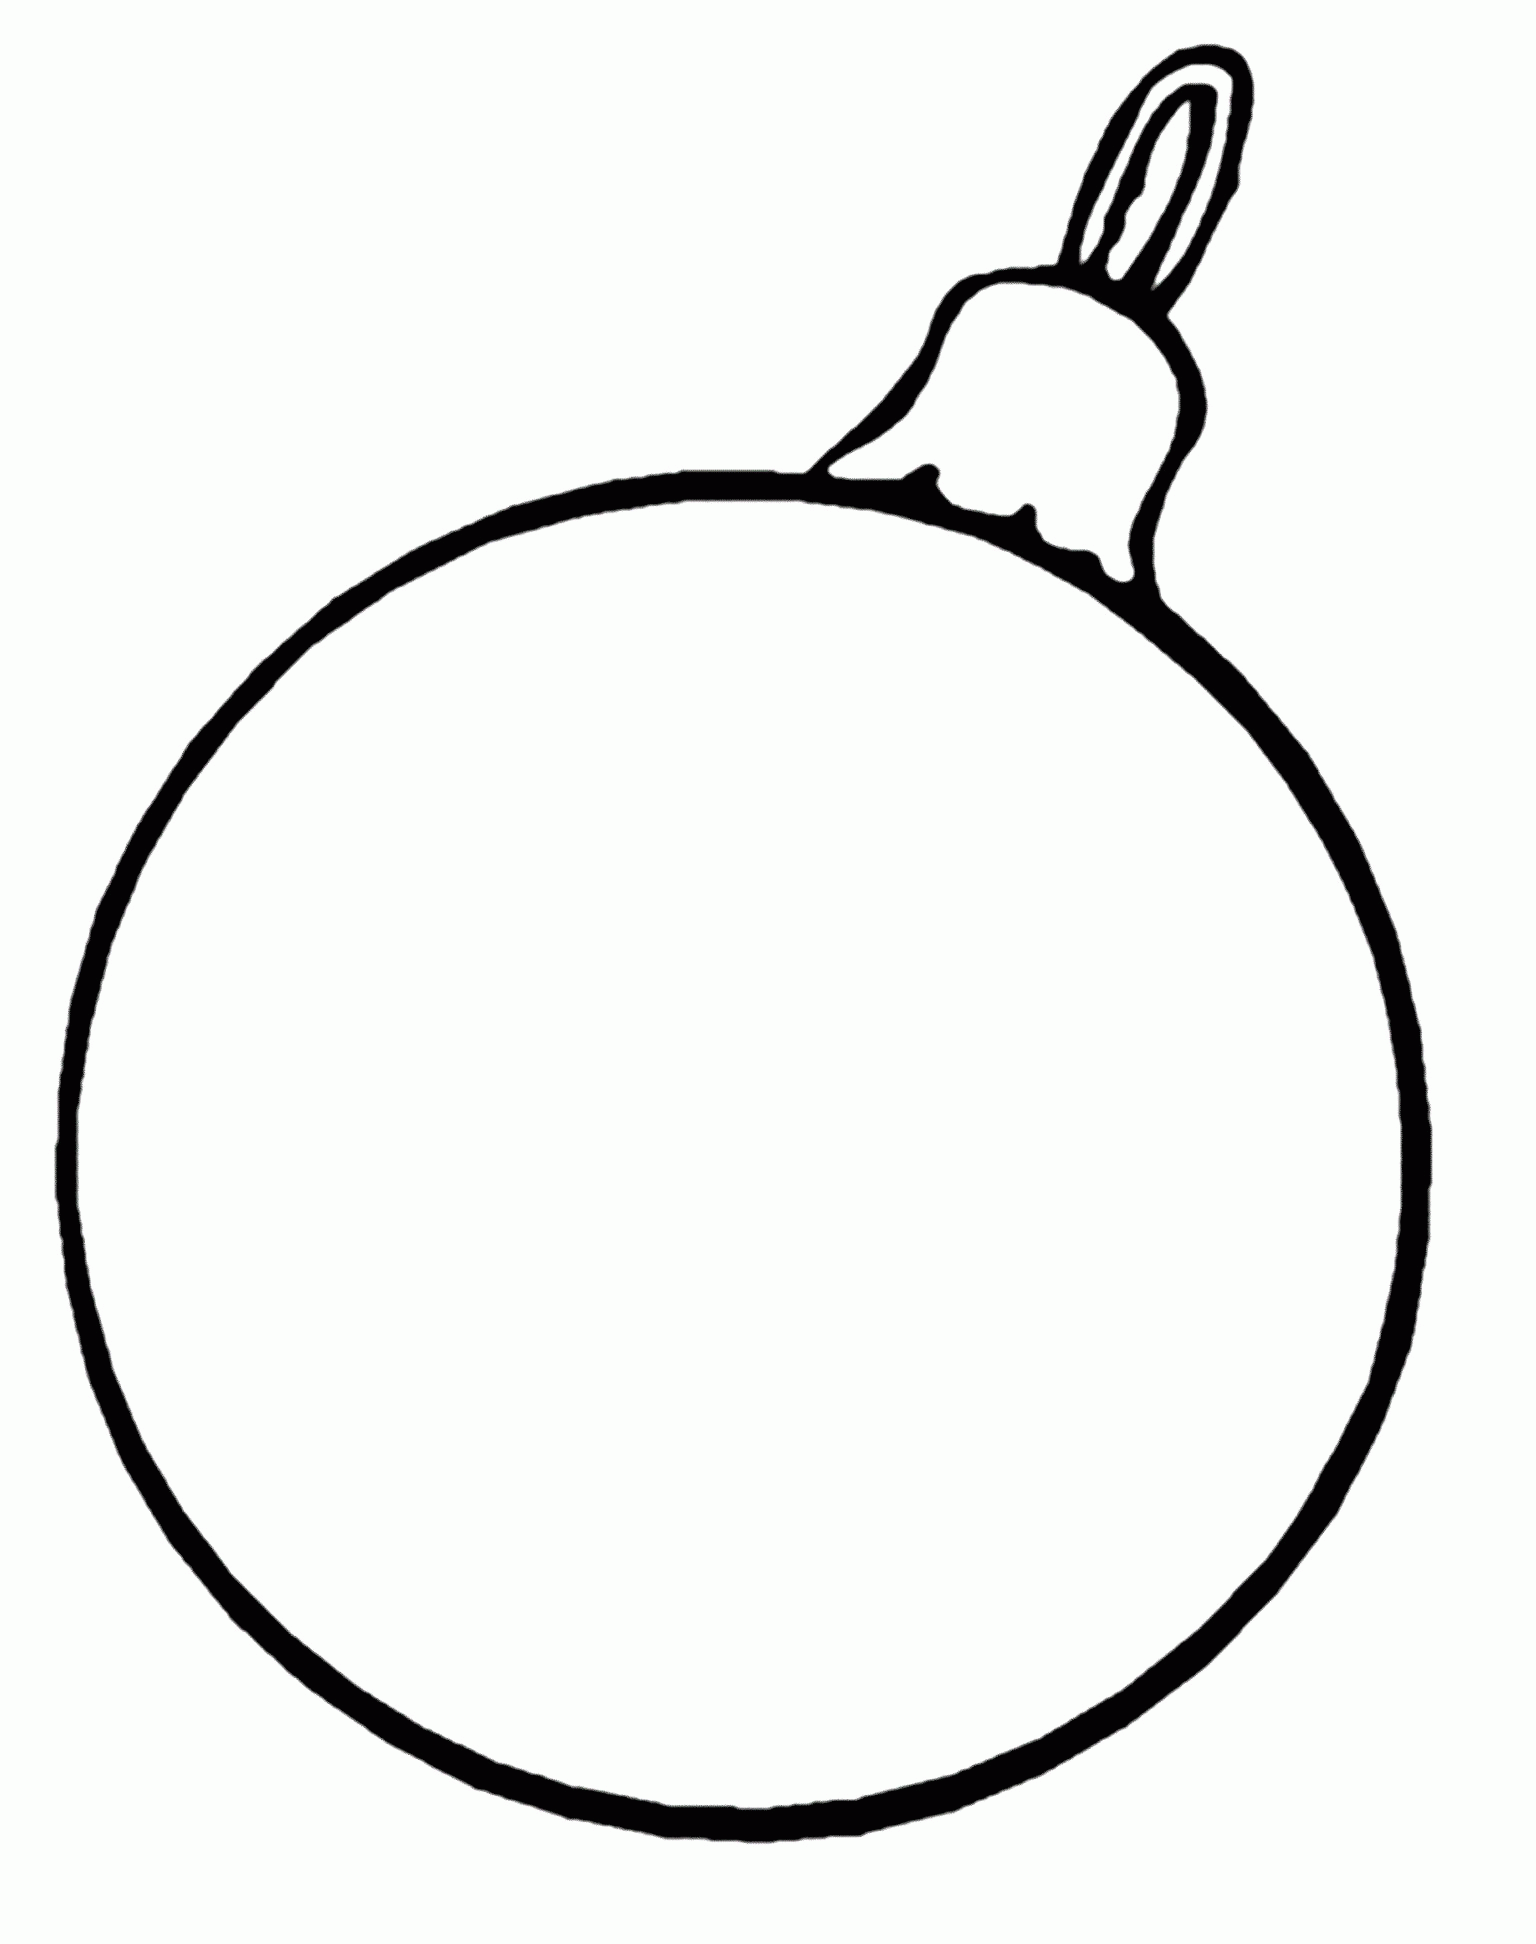 merry-christmas-coloring-pages-from-michaelsmakers-u-create-crafts